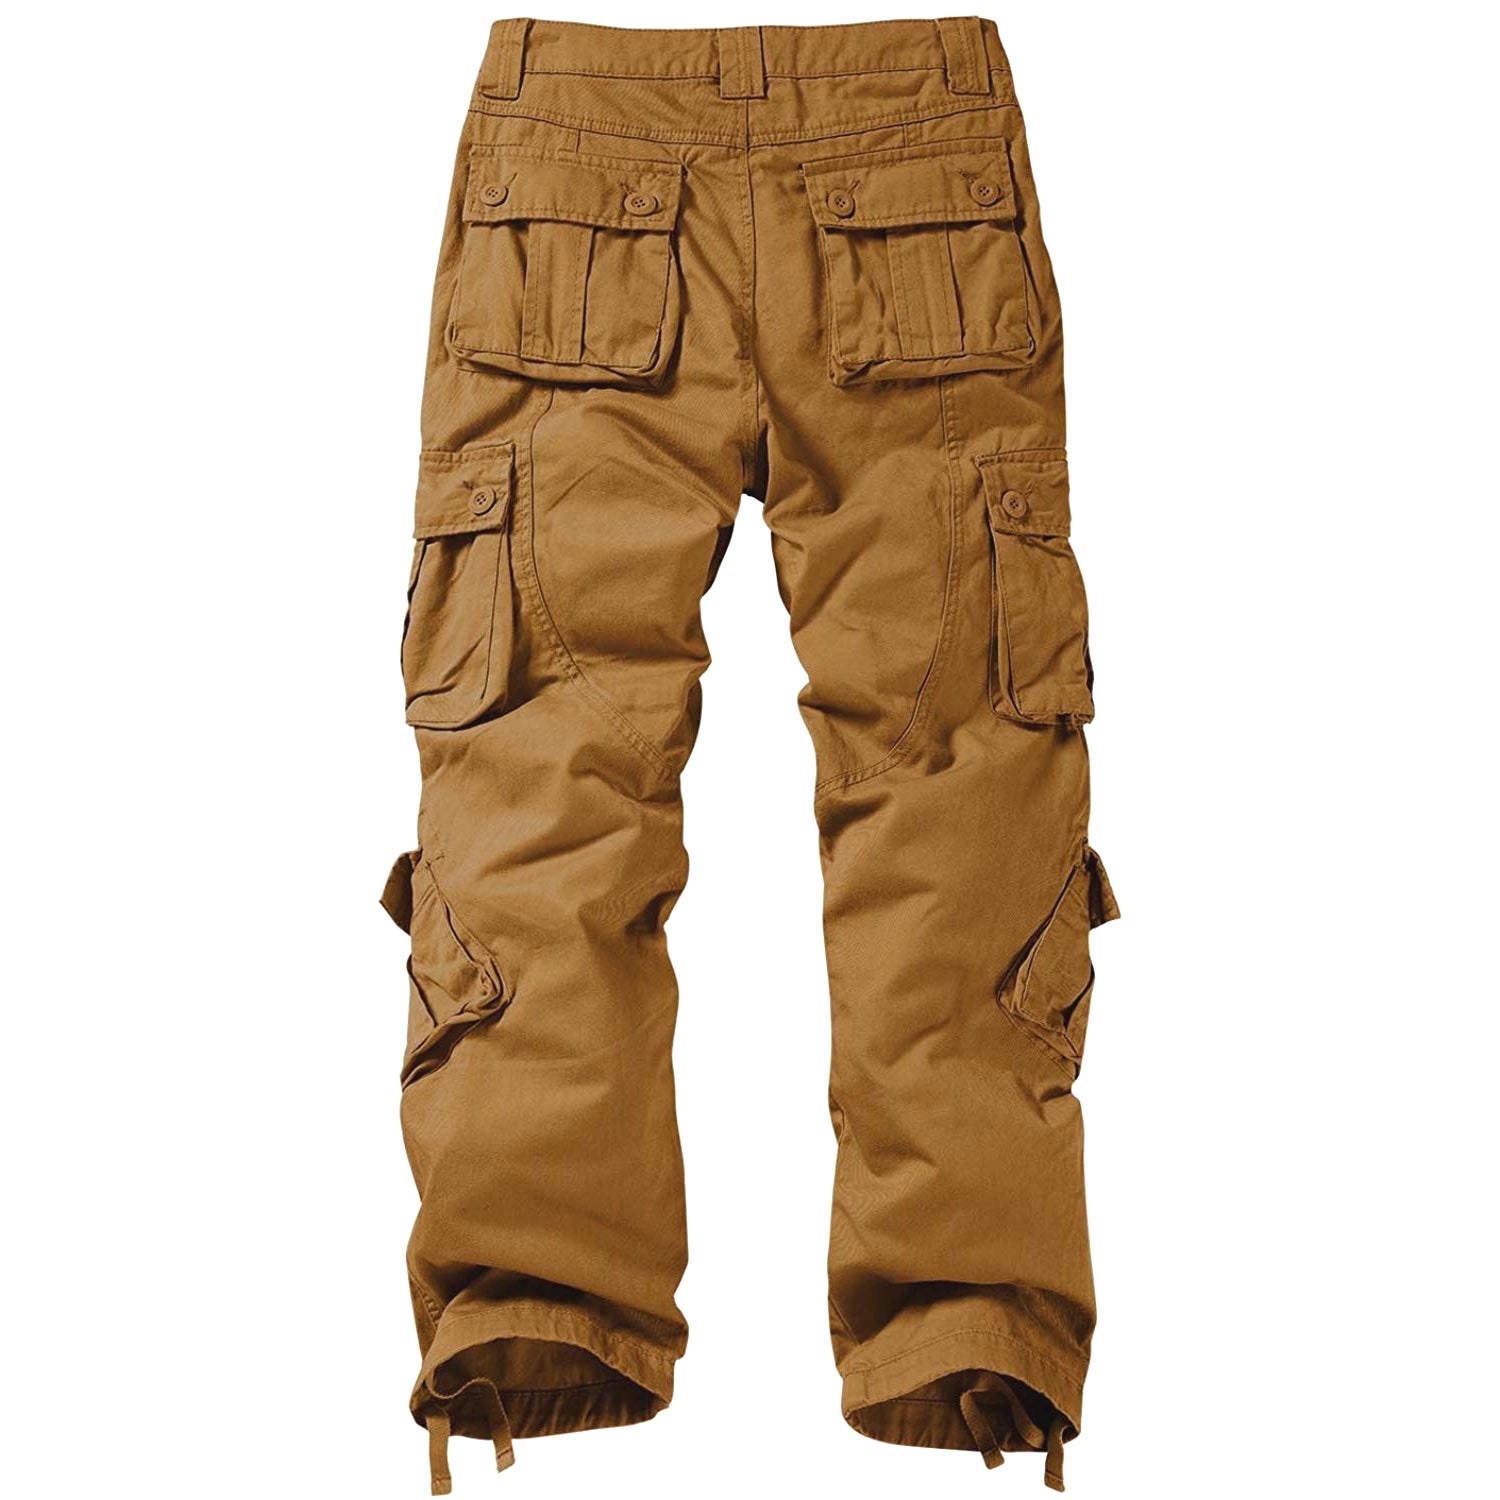 Tallas Pantalones Hombres Offers Discounts, Save 60%